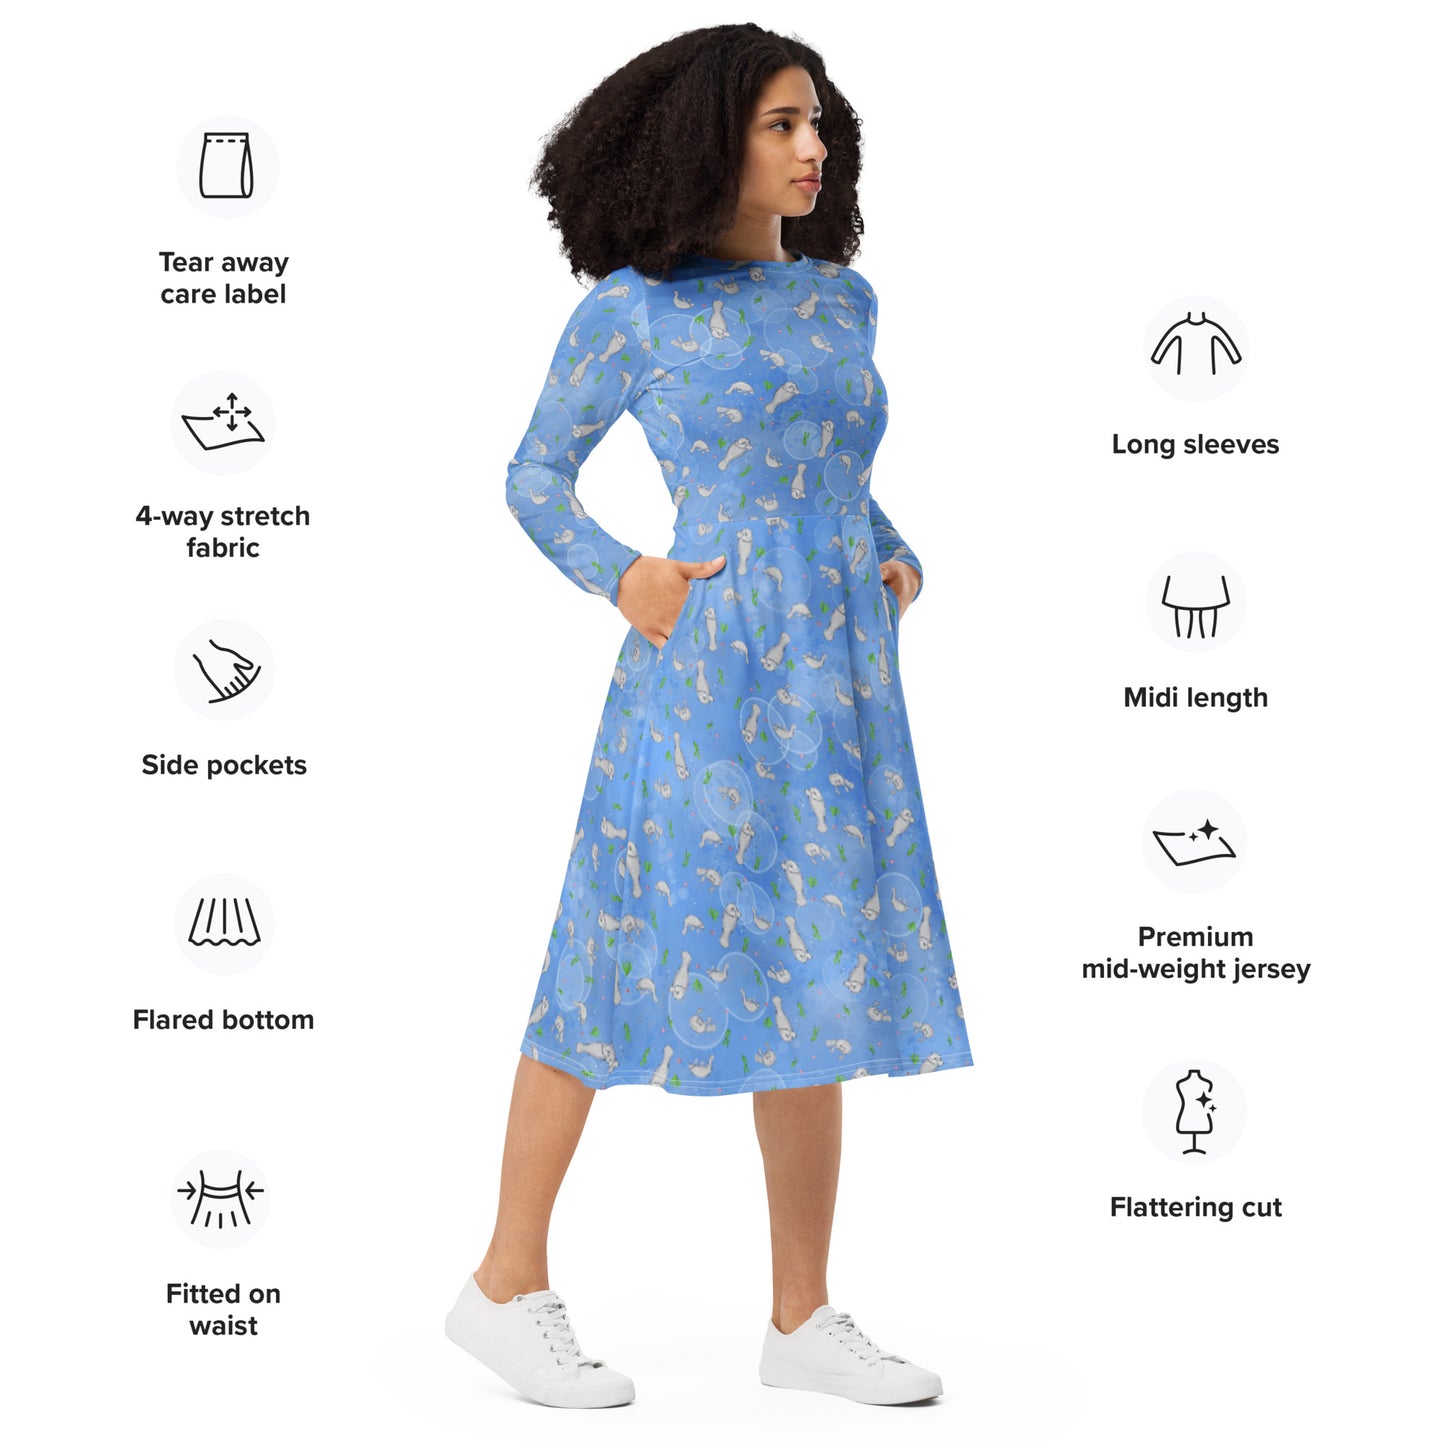 Long sleeve midi dress with fitted waist, flared bottom, and side pockets. Features a patterned design of manatees, seashells, seaweed, and bubbles on an ocean blue background. Shown on female model facing right.